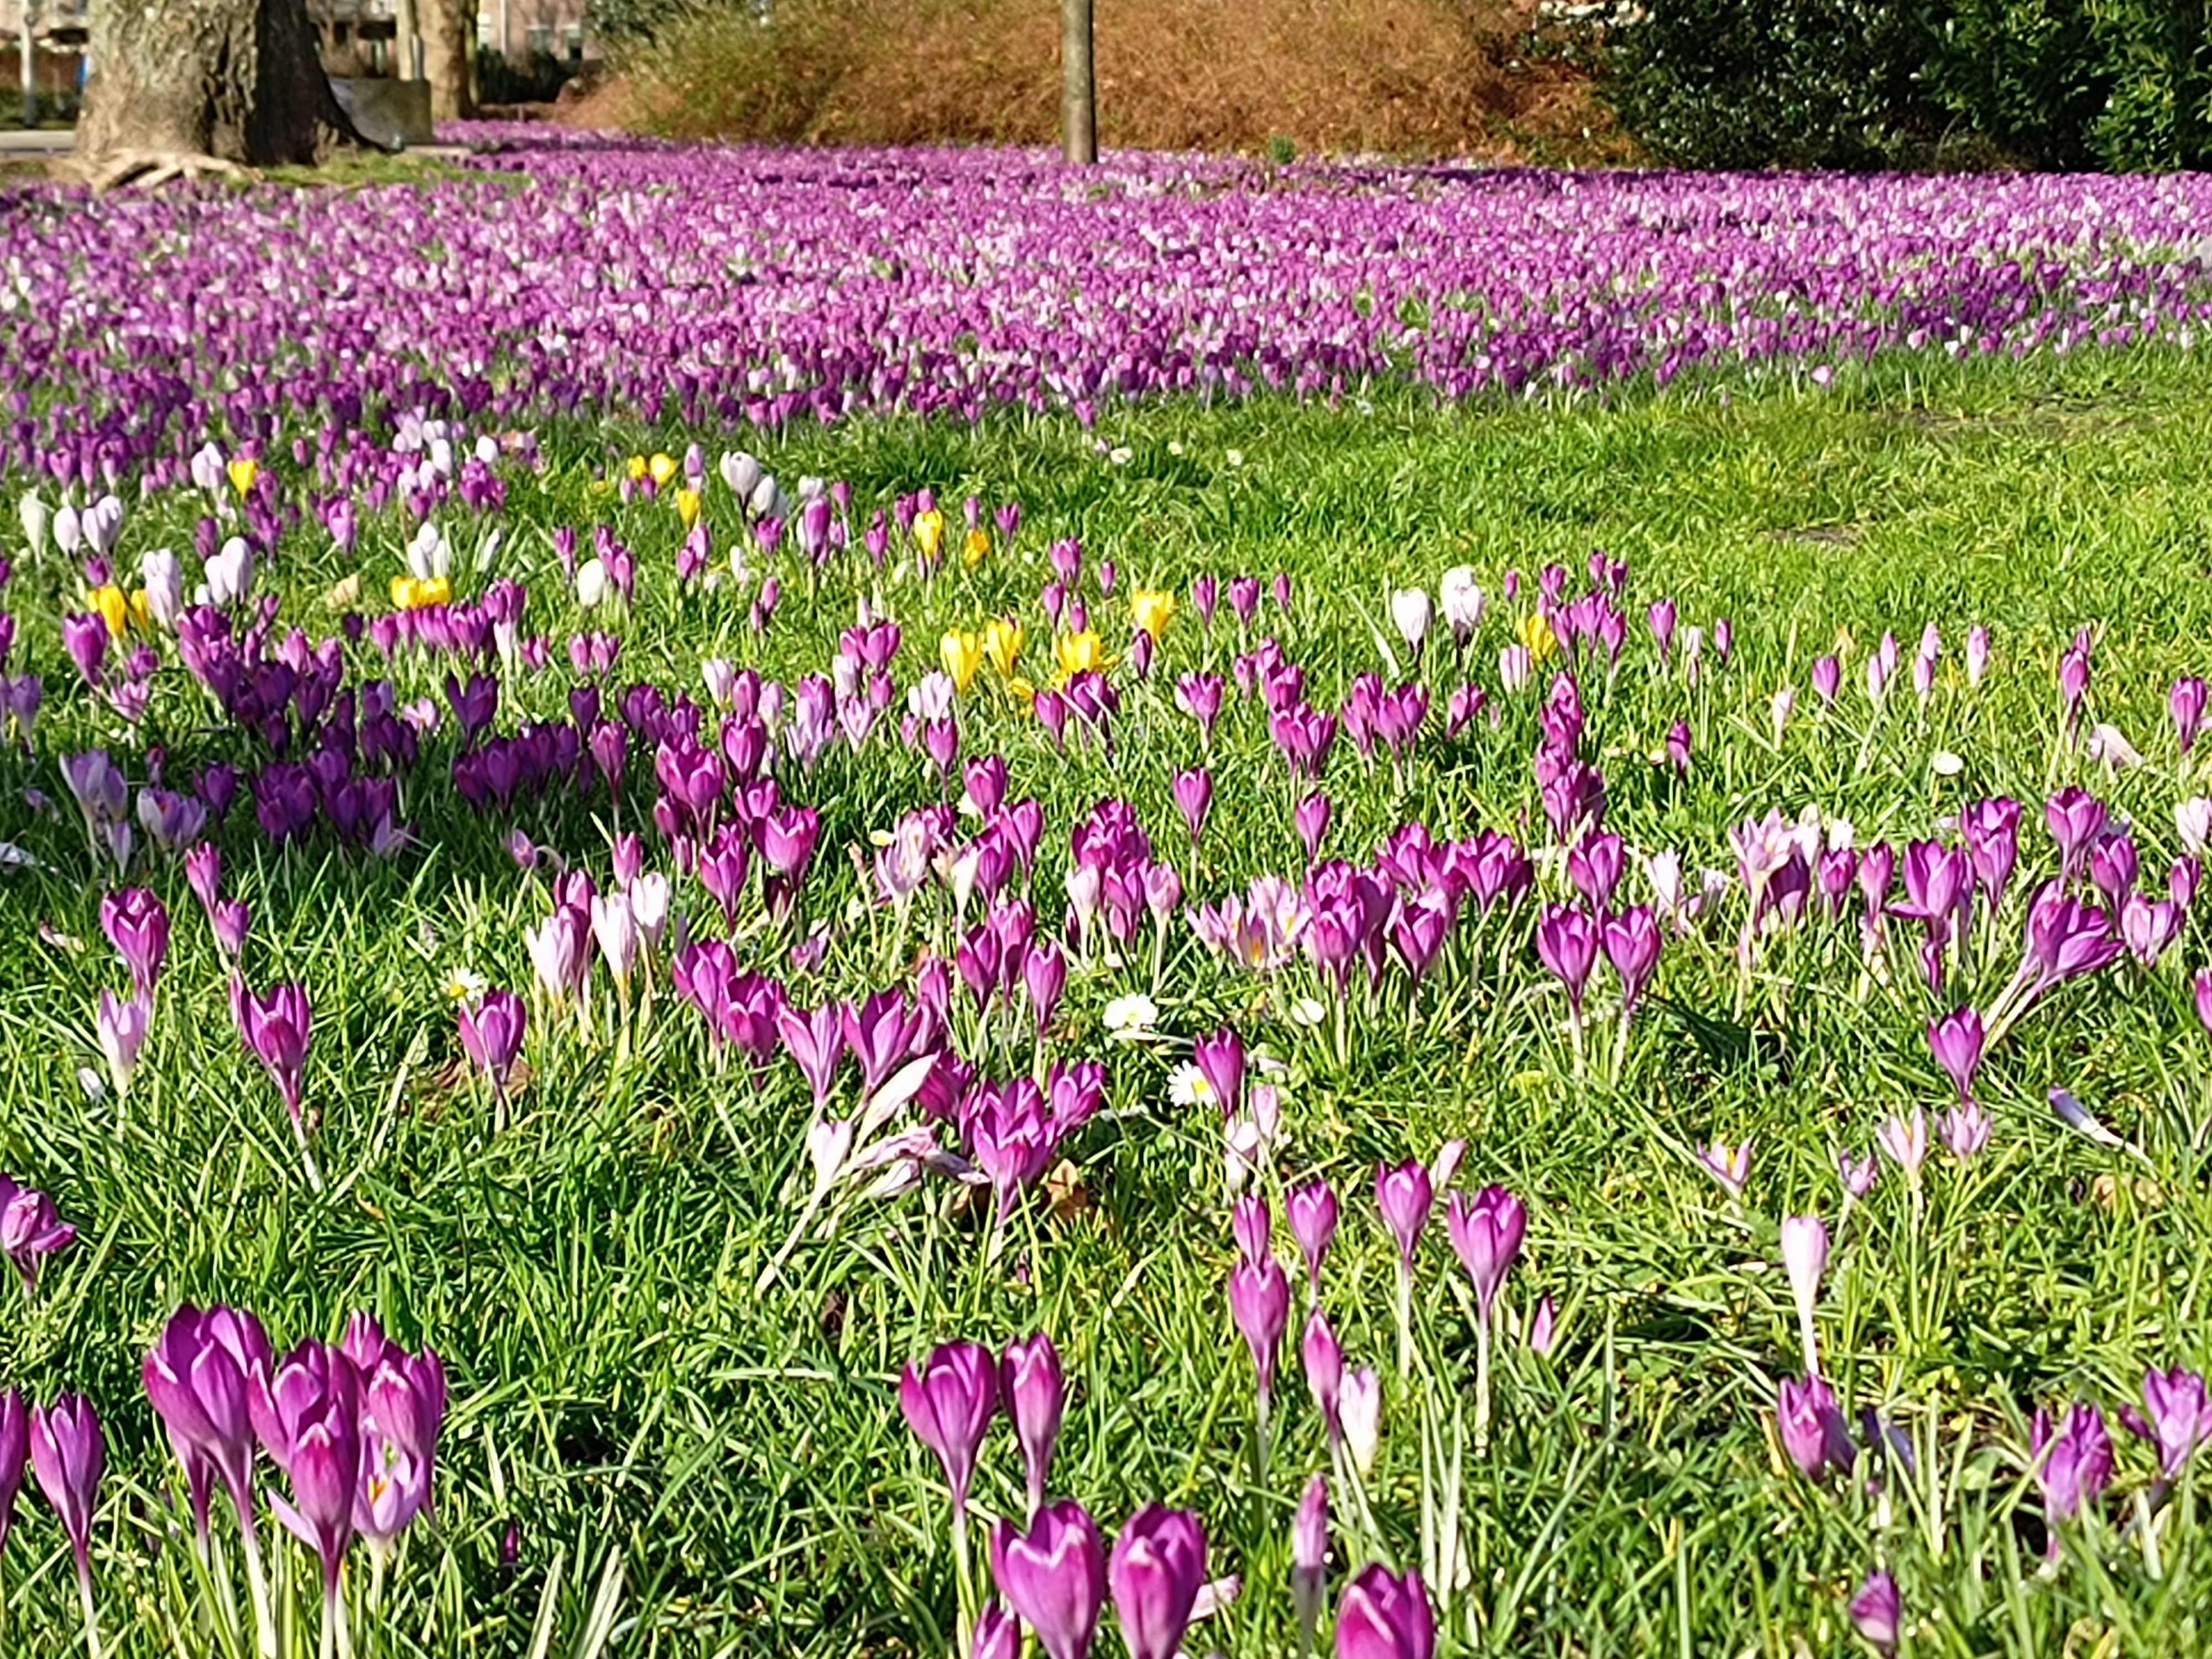 A field of mostly purple crocuses, with some white and yellow; taken February 2023.